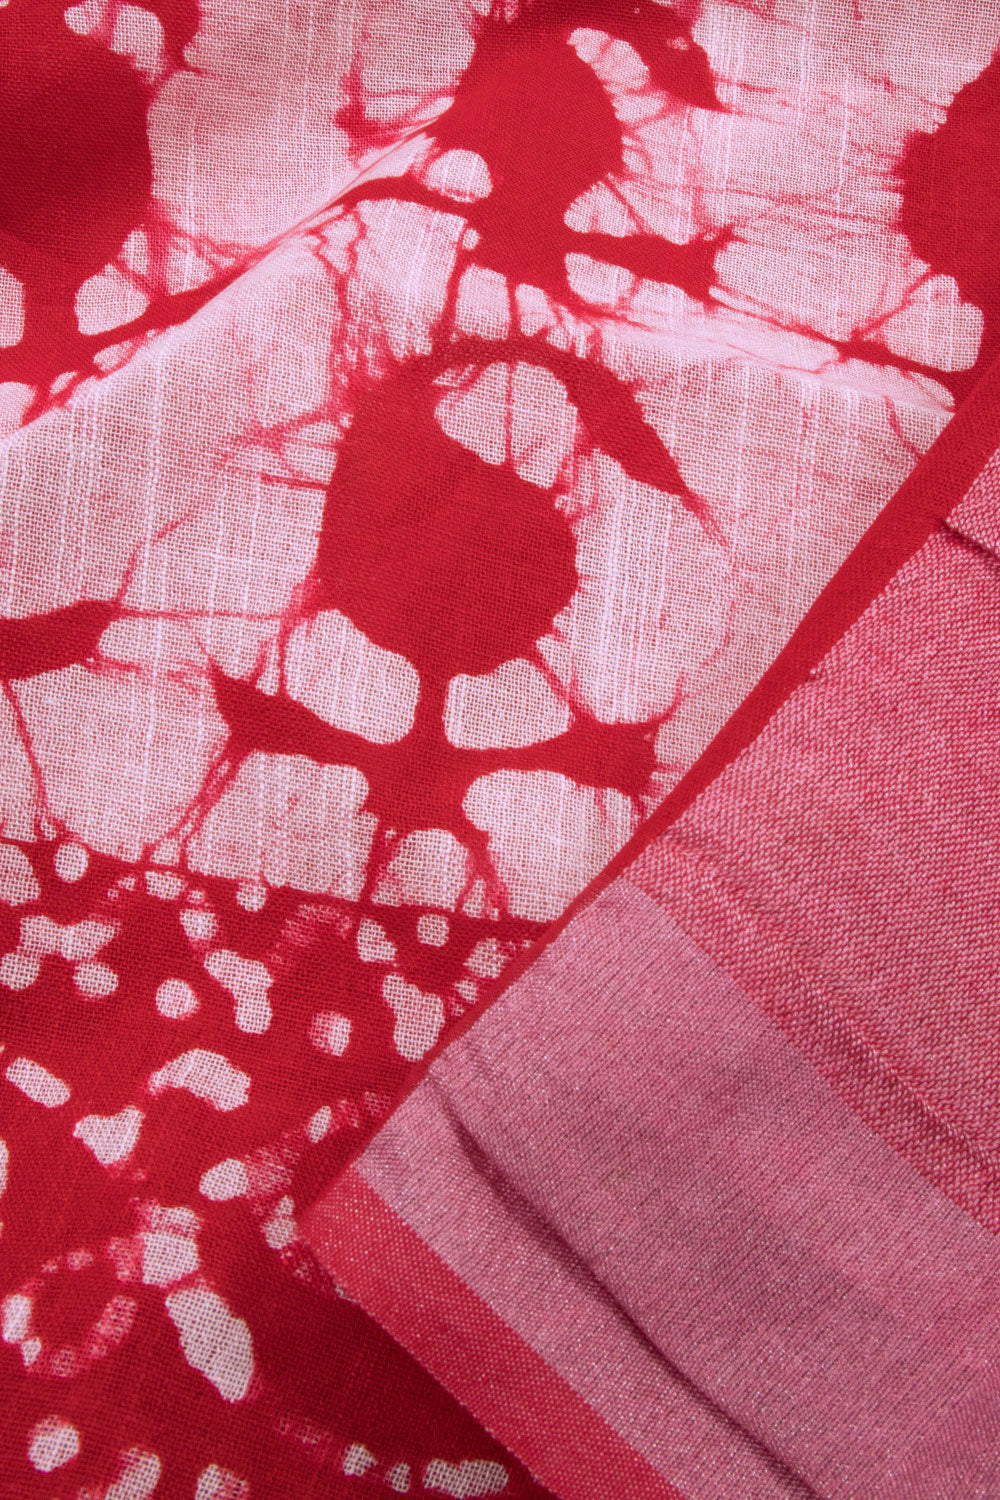 Red with Off White Batik Printed Linen Cotton Saree - 10063865